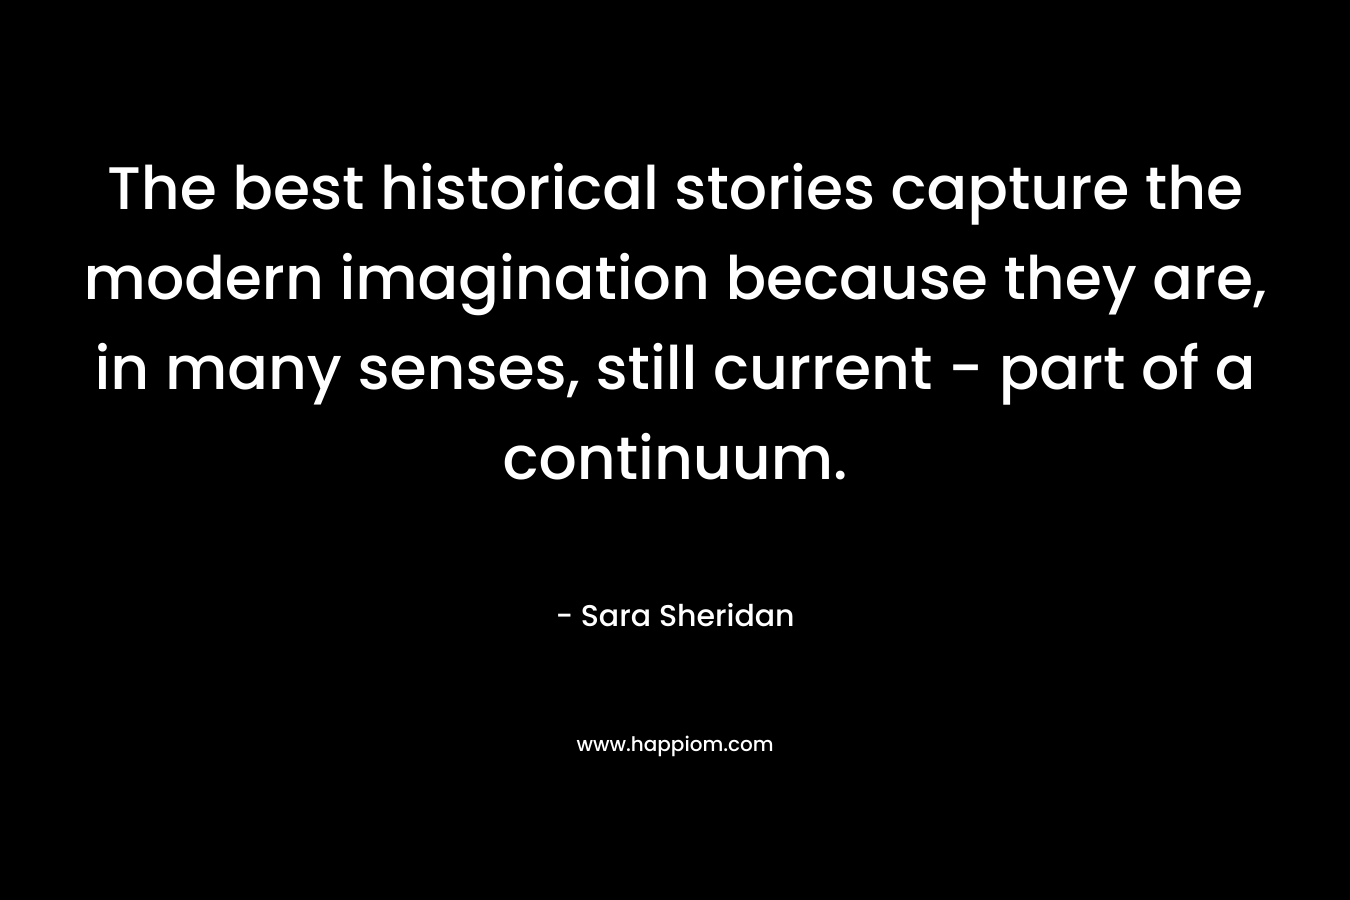 The best historical stories capture the modern imagination because they are, in many senses, still current - part of a continuum.